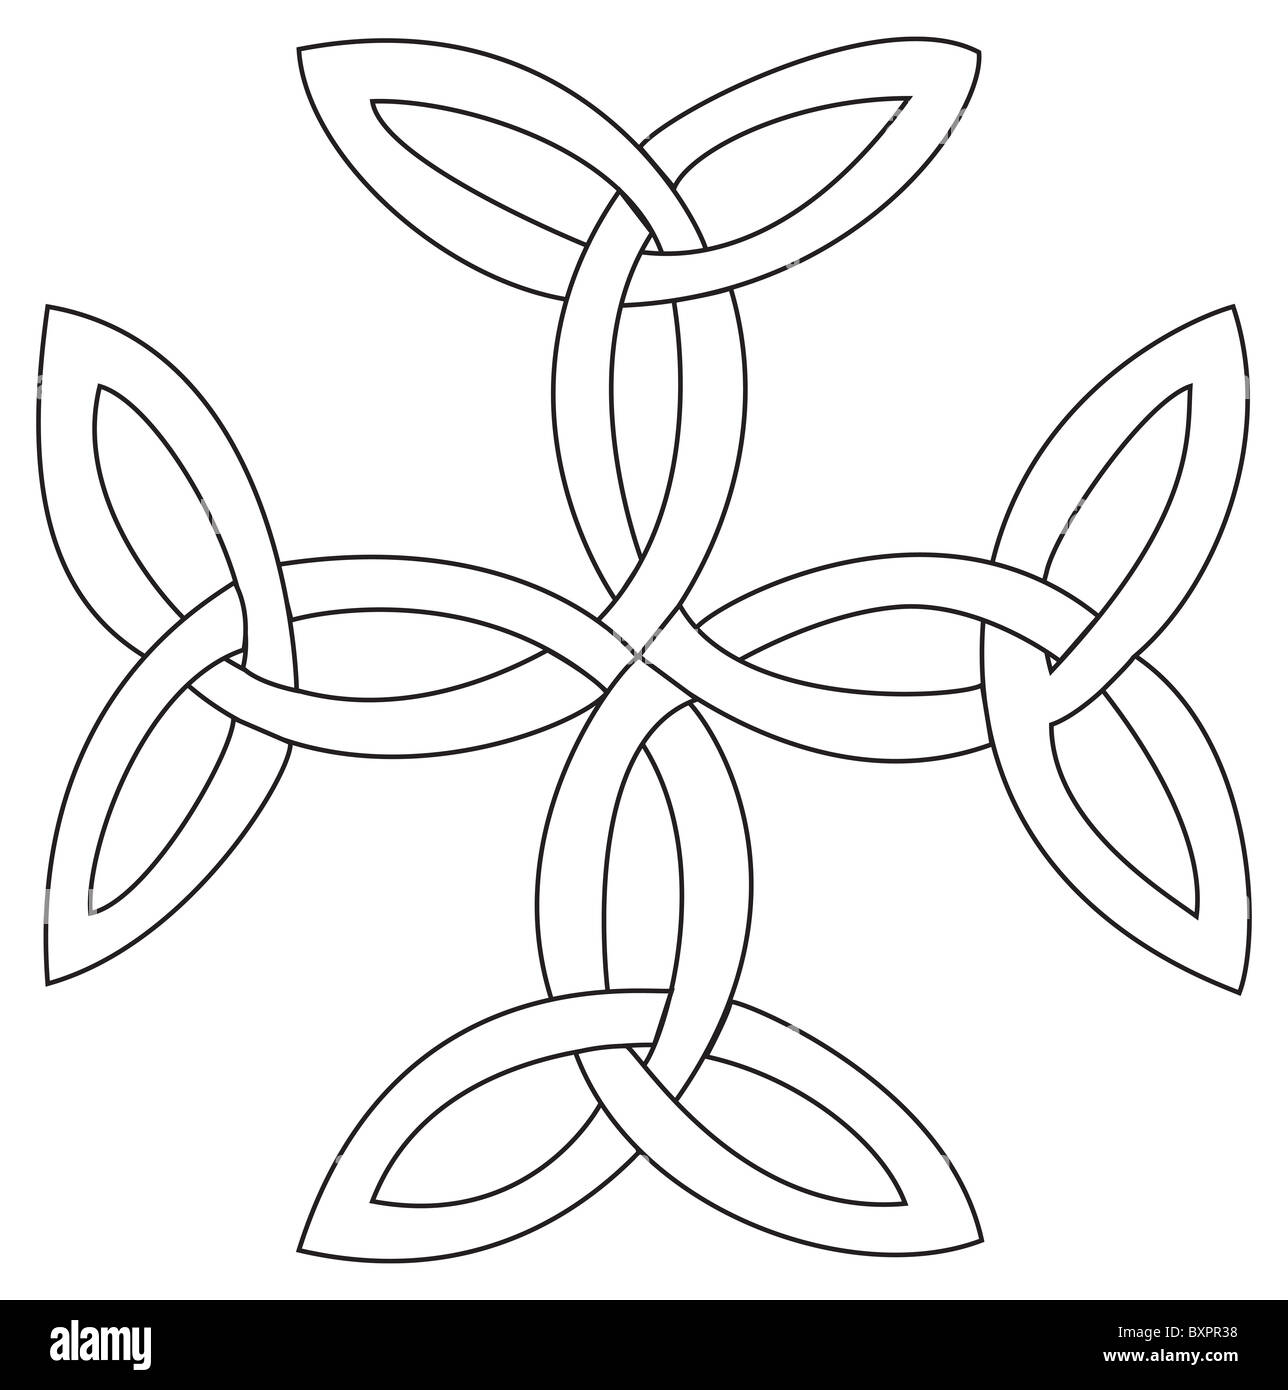 Triquetras cross symbol knot drawing Stock Photo